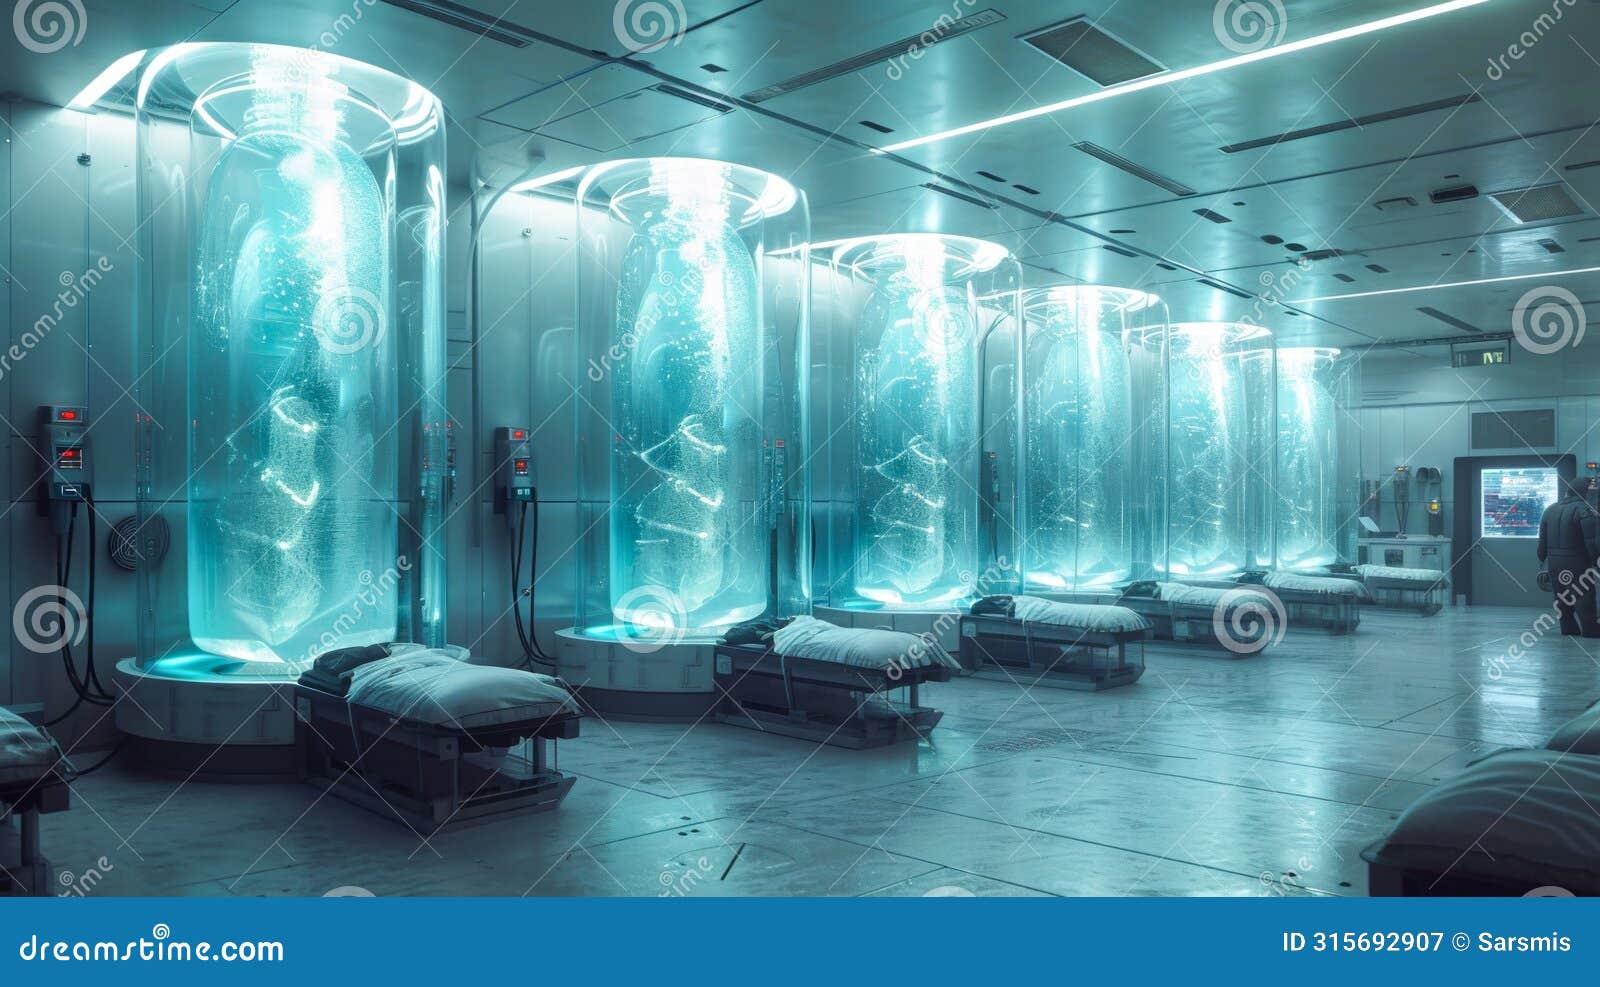 advanced cryogenic storage system with illuminated chambers in a tech facility. cryogenic chambers for freezing bodies